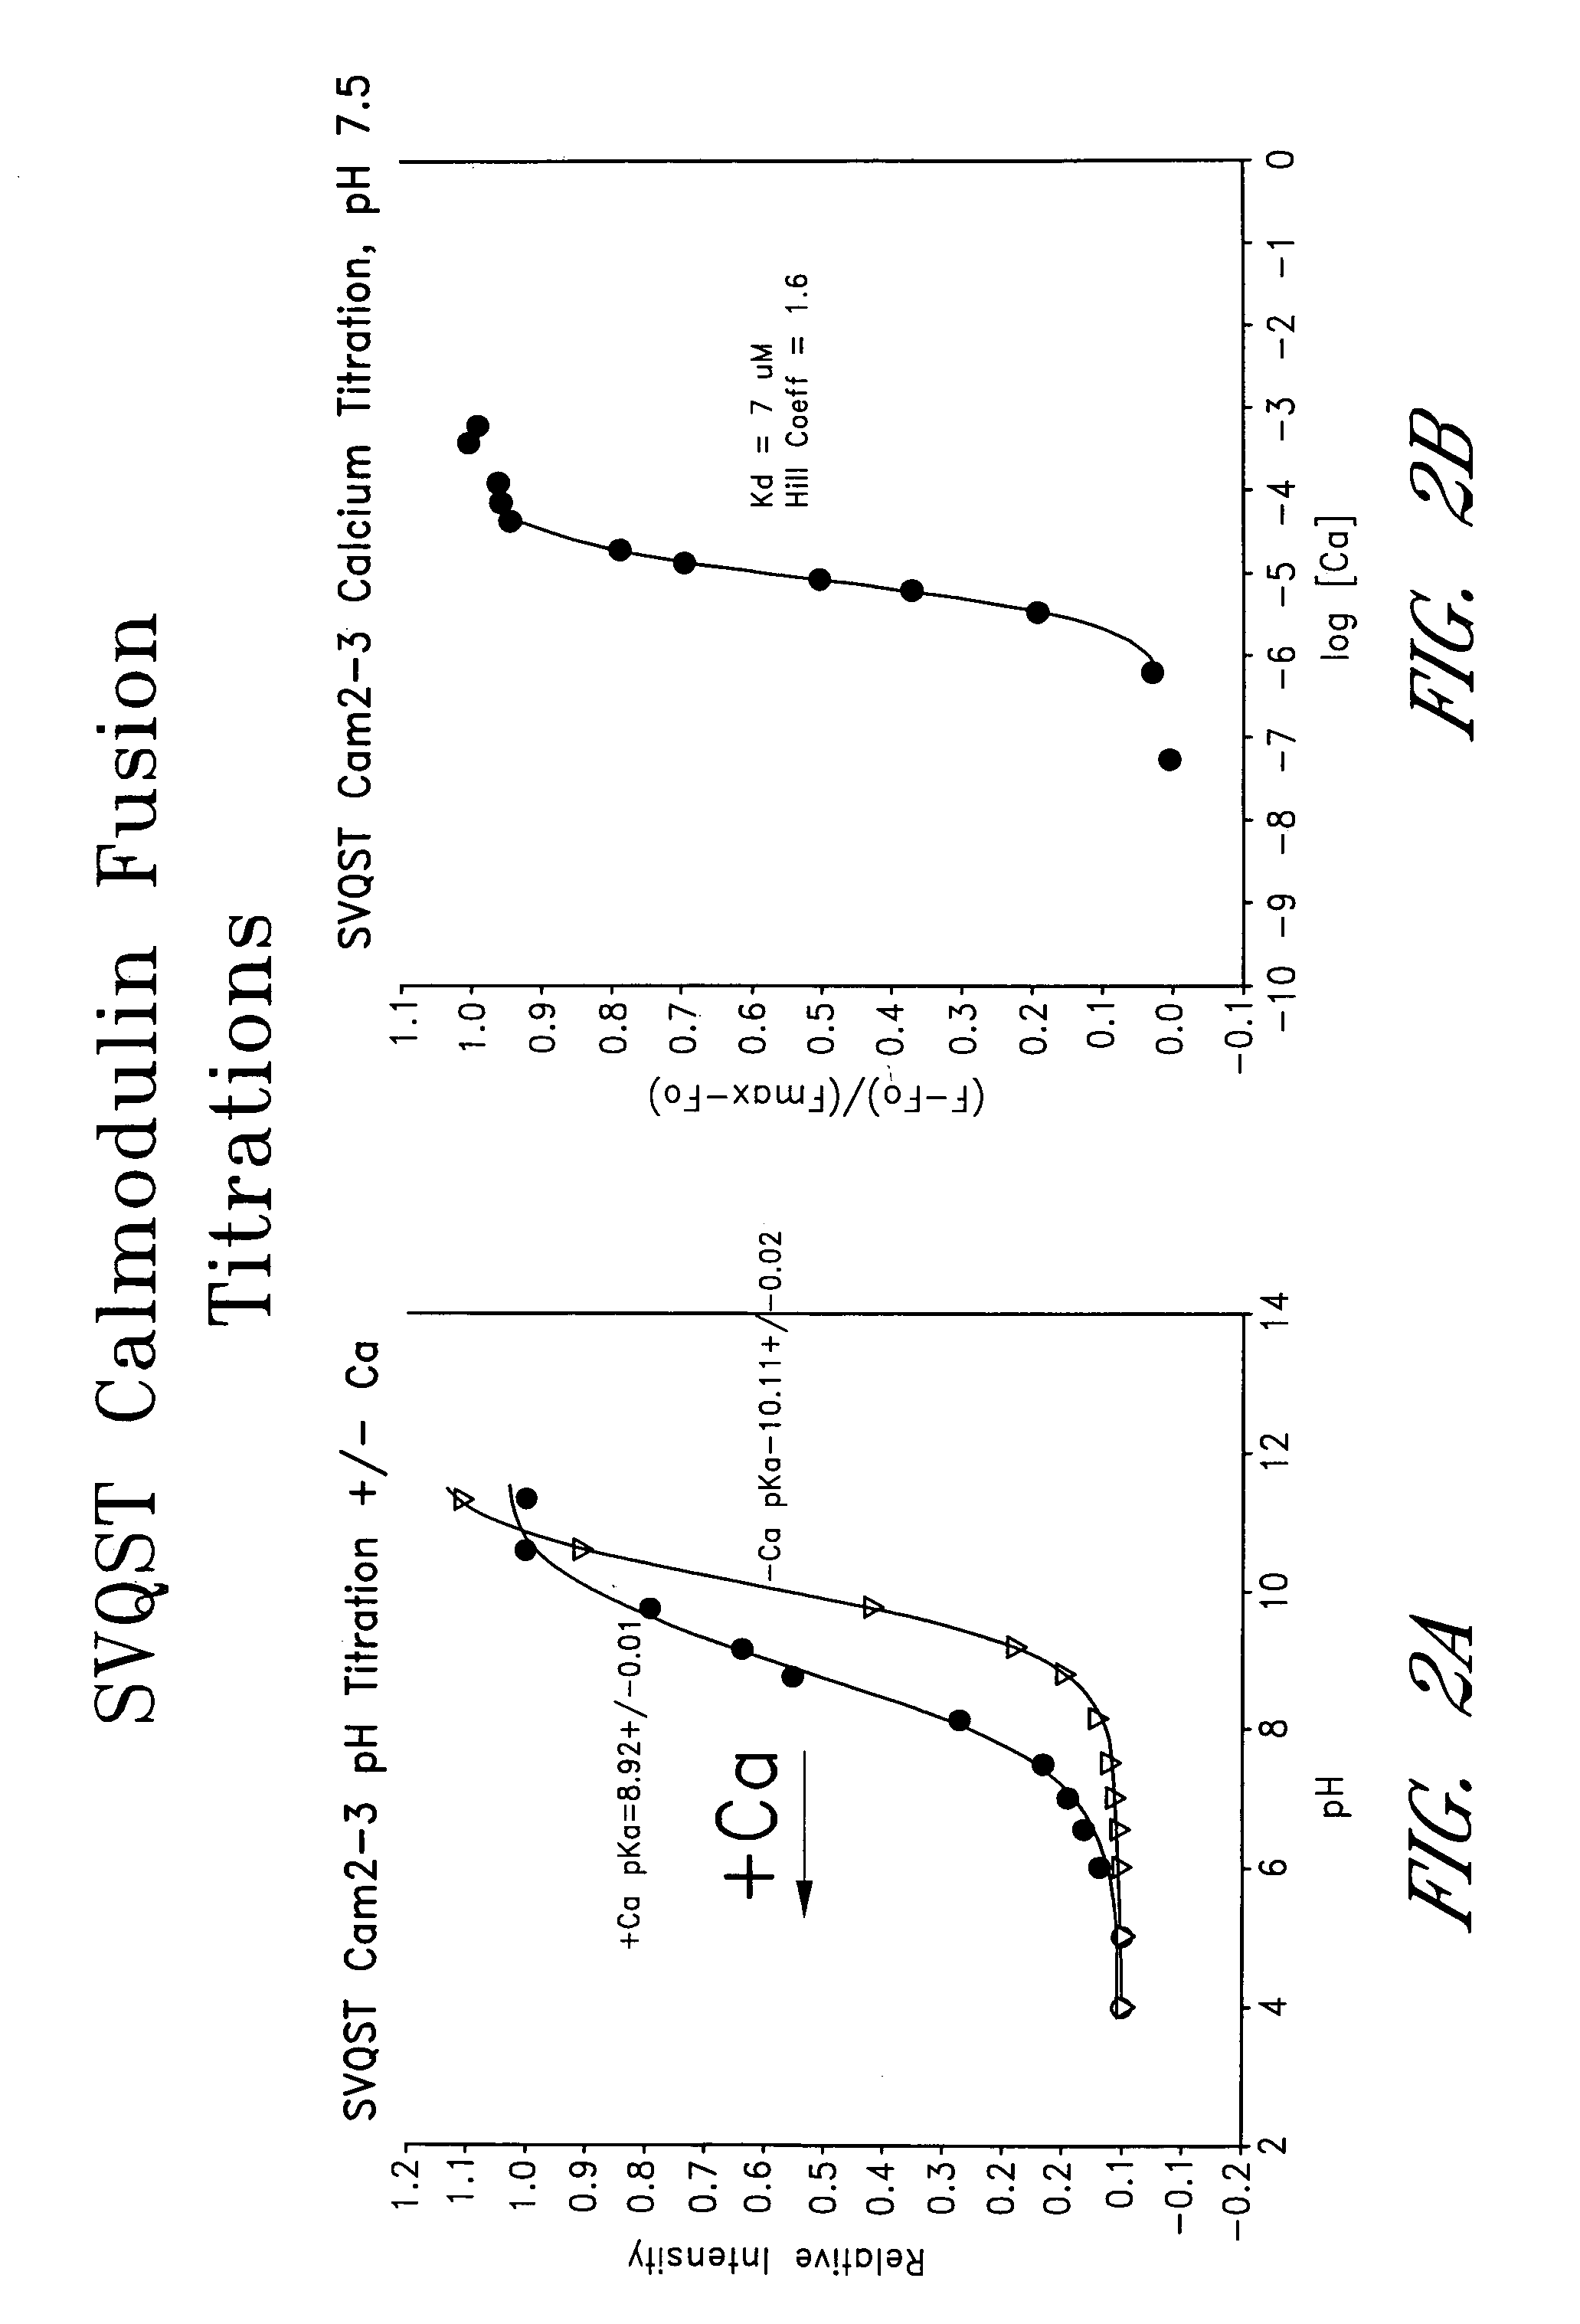 Circularly permuted fluorescent protein indicators